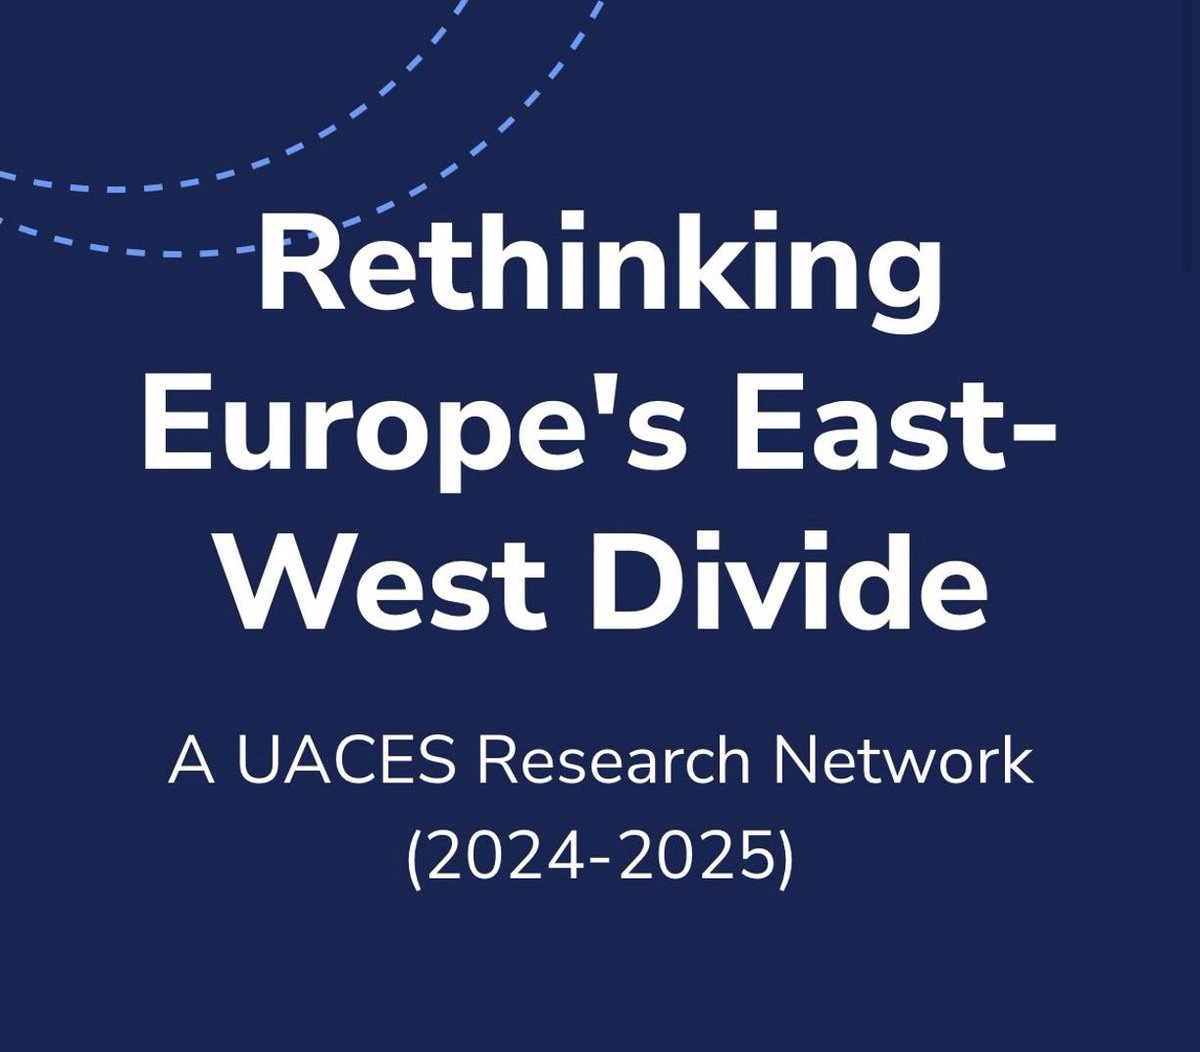 Rethinking #Europe’s East-West Divide: Topics: #technopopulism in CEE & Western Europe| #EU economic g.| Join us at @UACES conference in Trento uaces.org/trento/themed-… Submission deadline: 21 January #UACES2024 Julia Rone @CRASSHlive @eli_gateva @Politics_Oxford @EastWestDivide